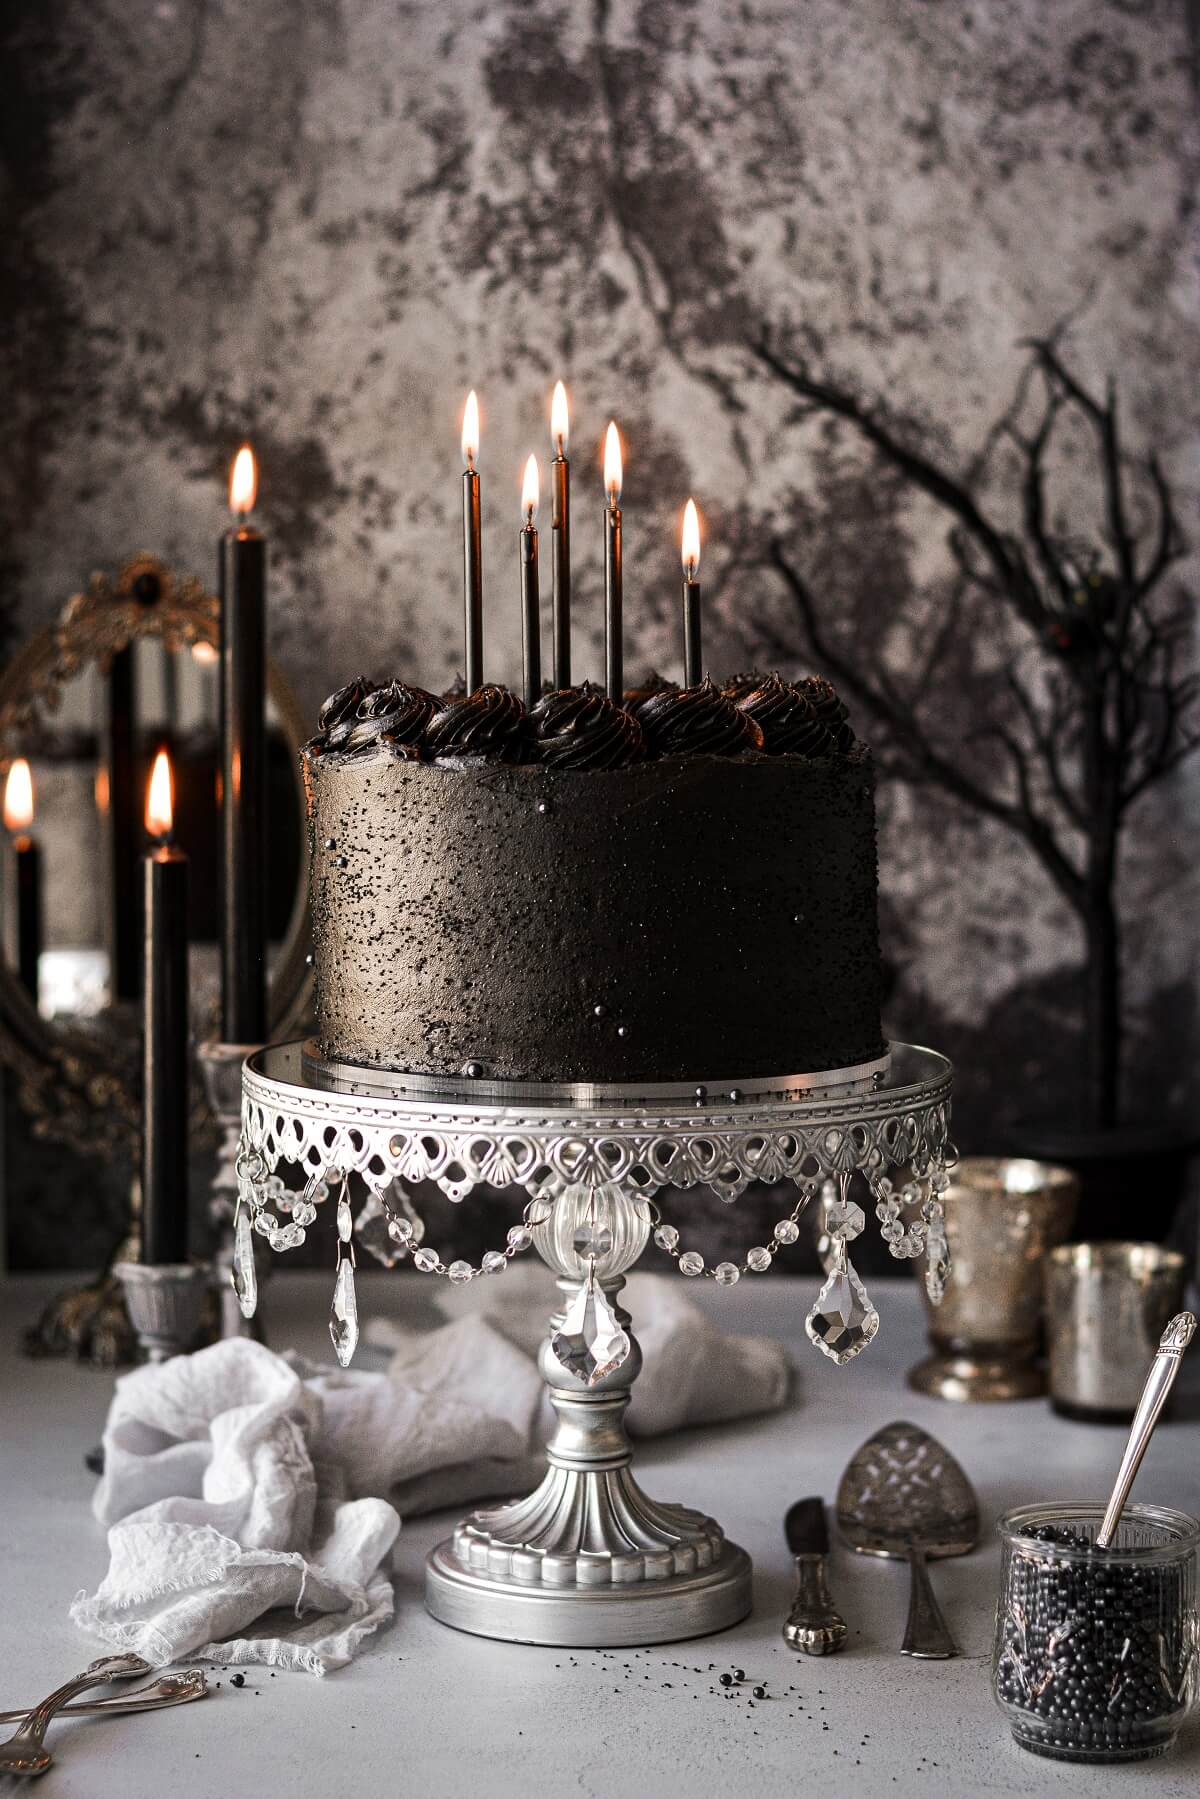 A moody scene with candles and a black velvet cake in a silver cake stand.